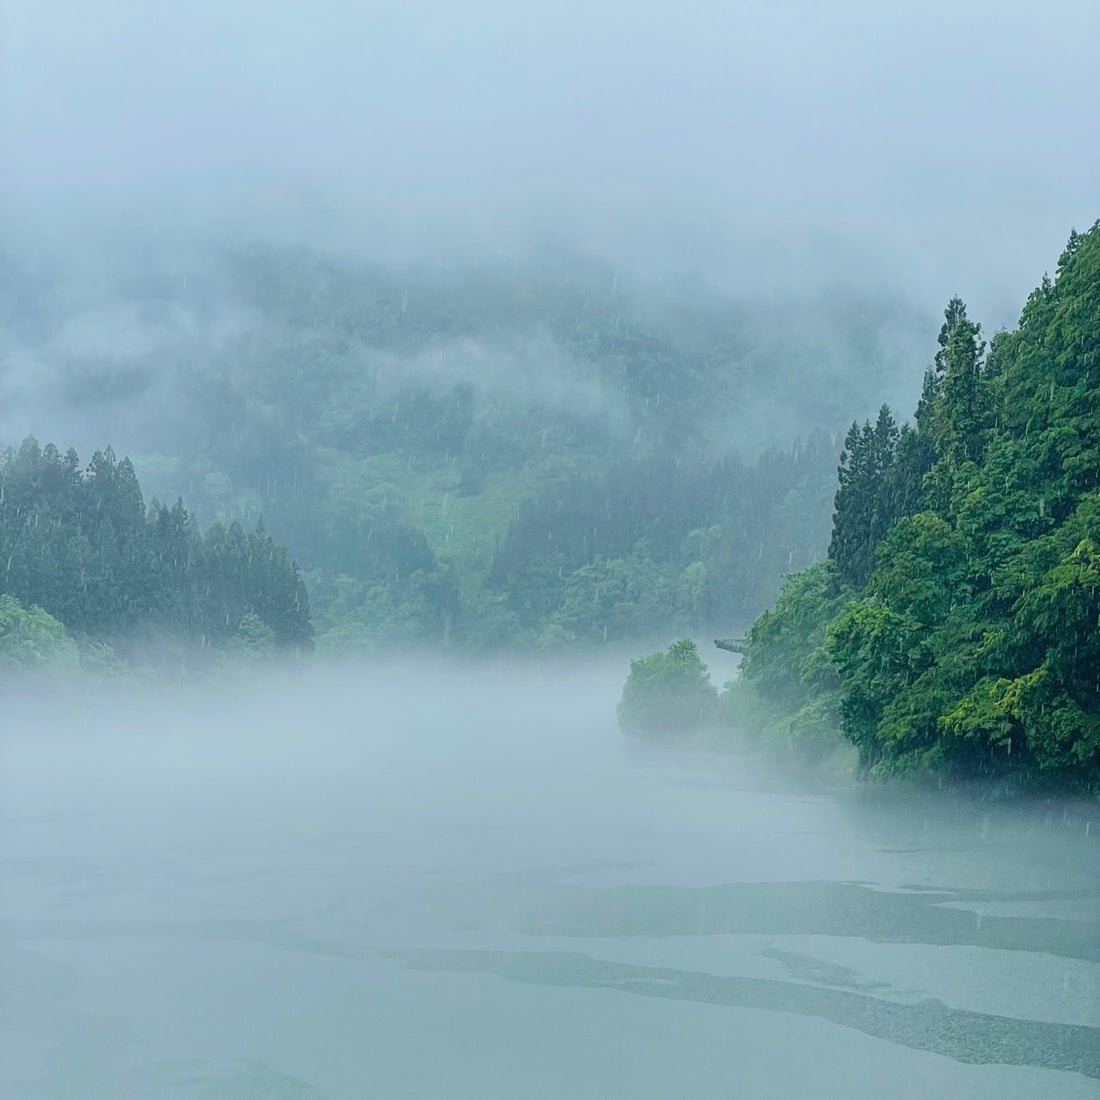 Want to visit "Hidden Gems in Japan" on your next trip?